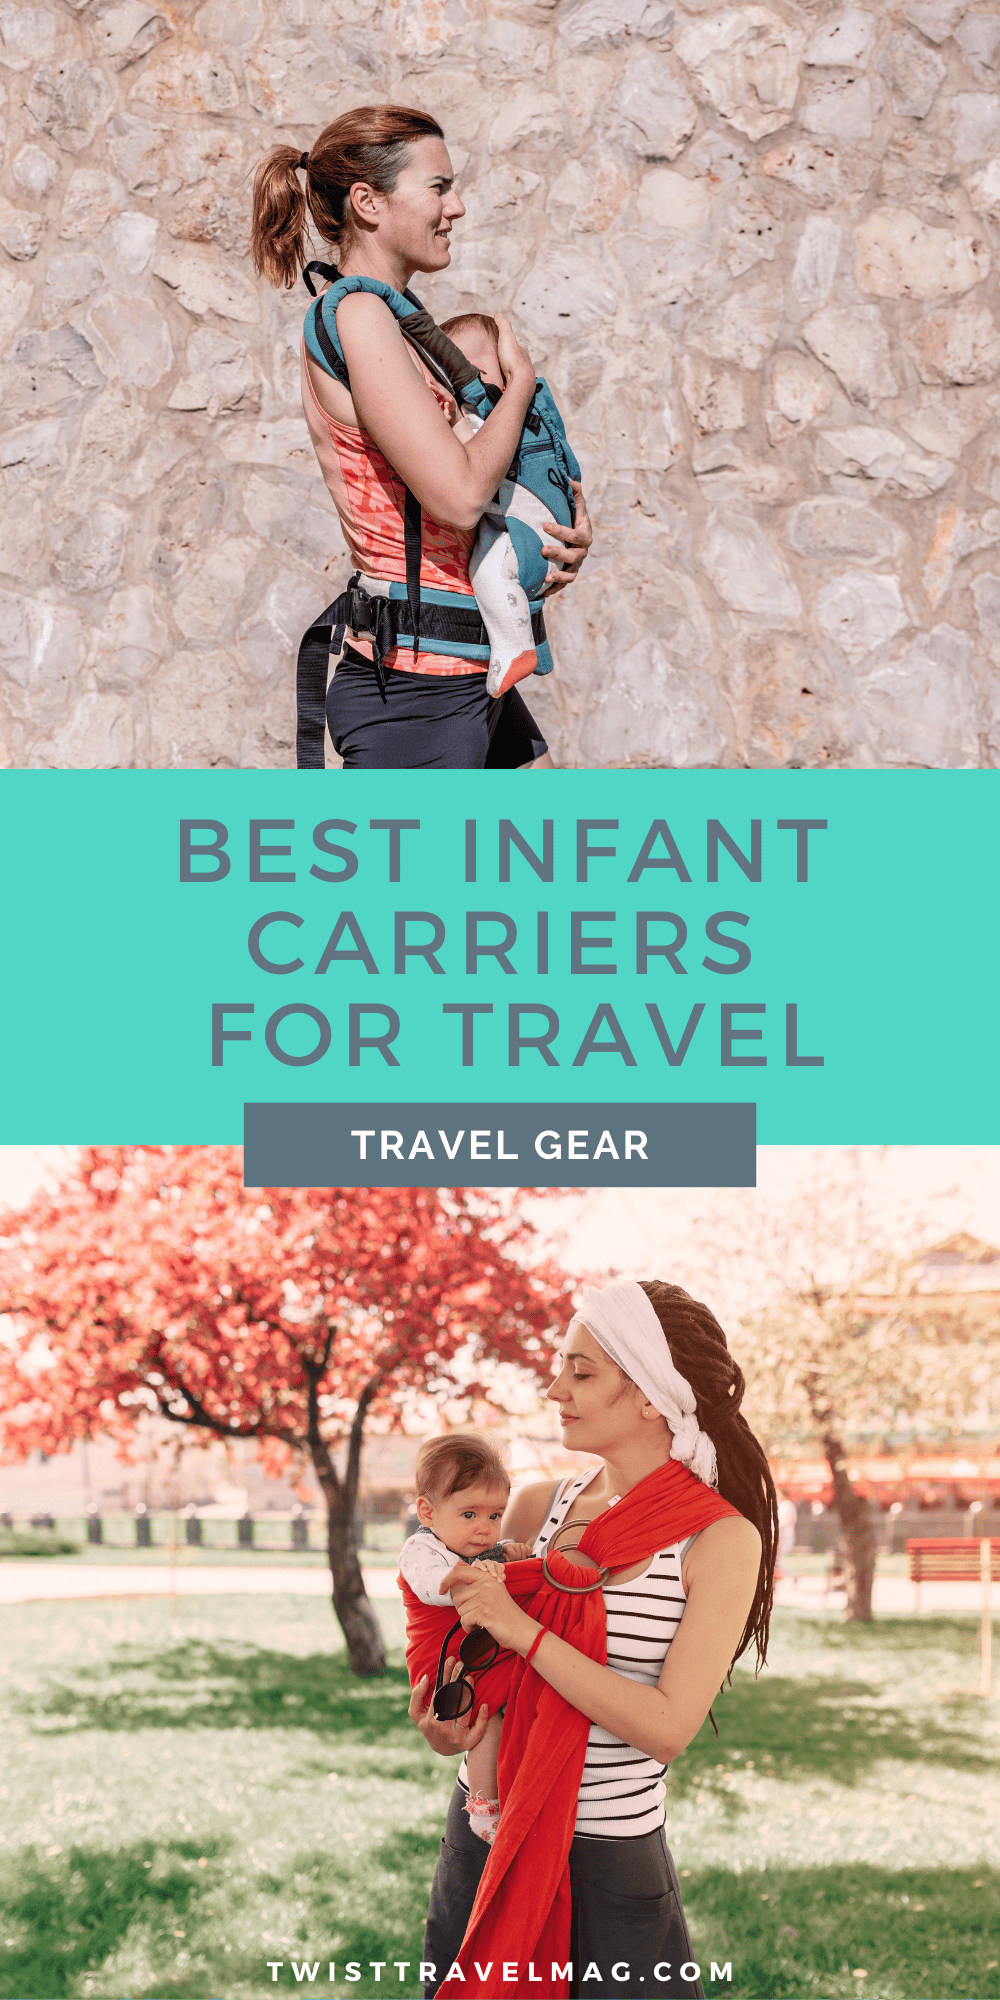 Best Infant Carriers for travel